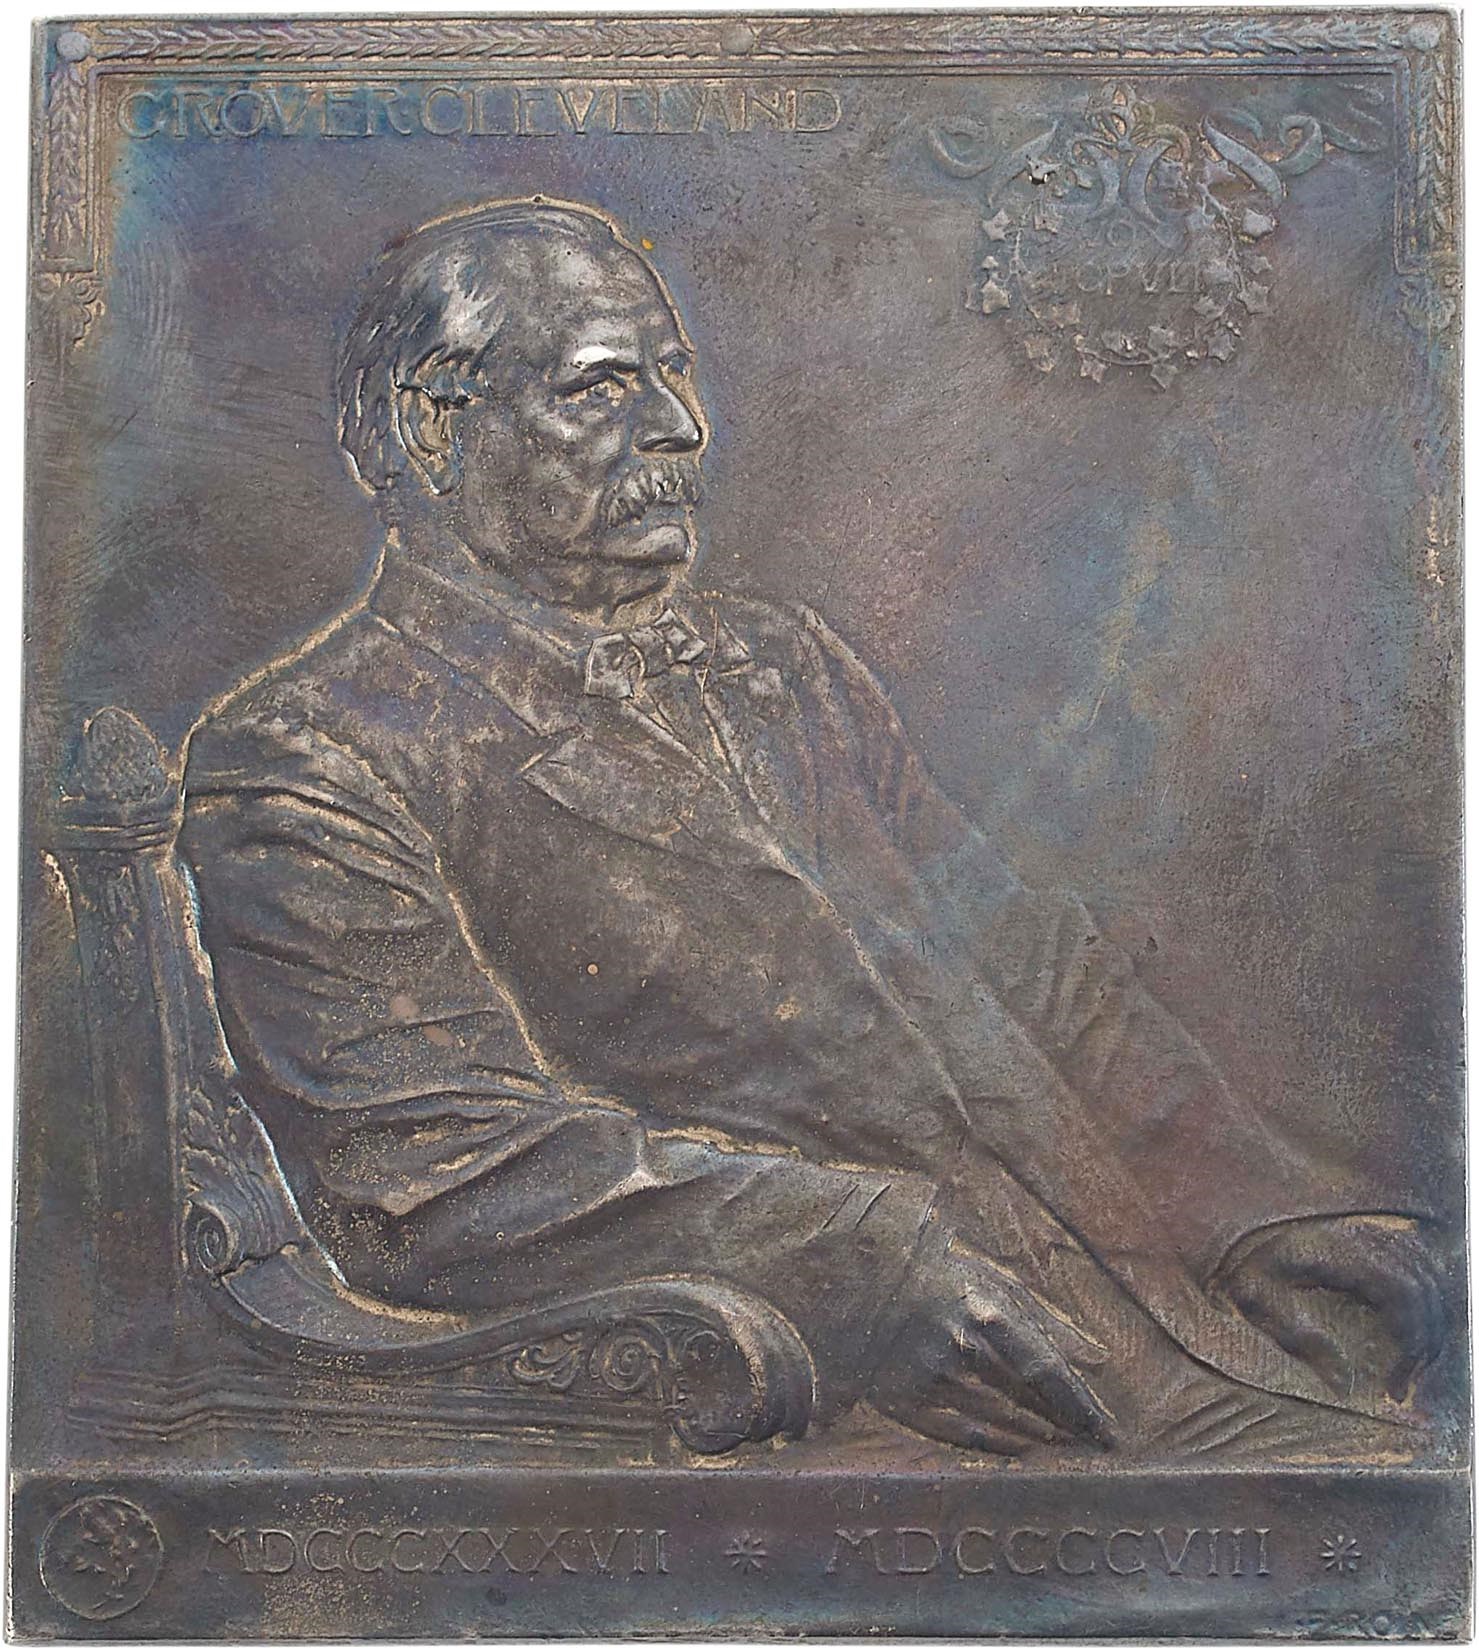 The New Yorker Collection - 1908 Grover Cleveland Vox Populi Medallic Plaque